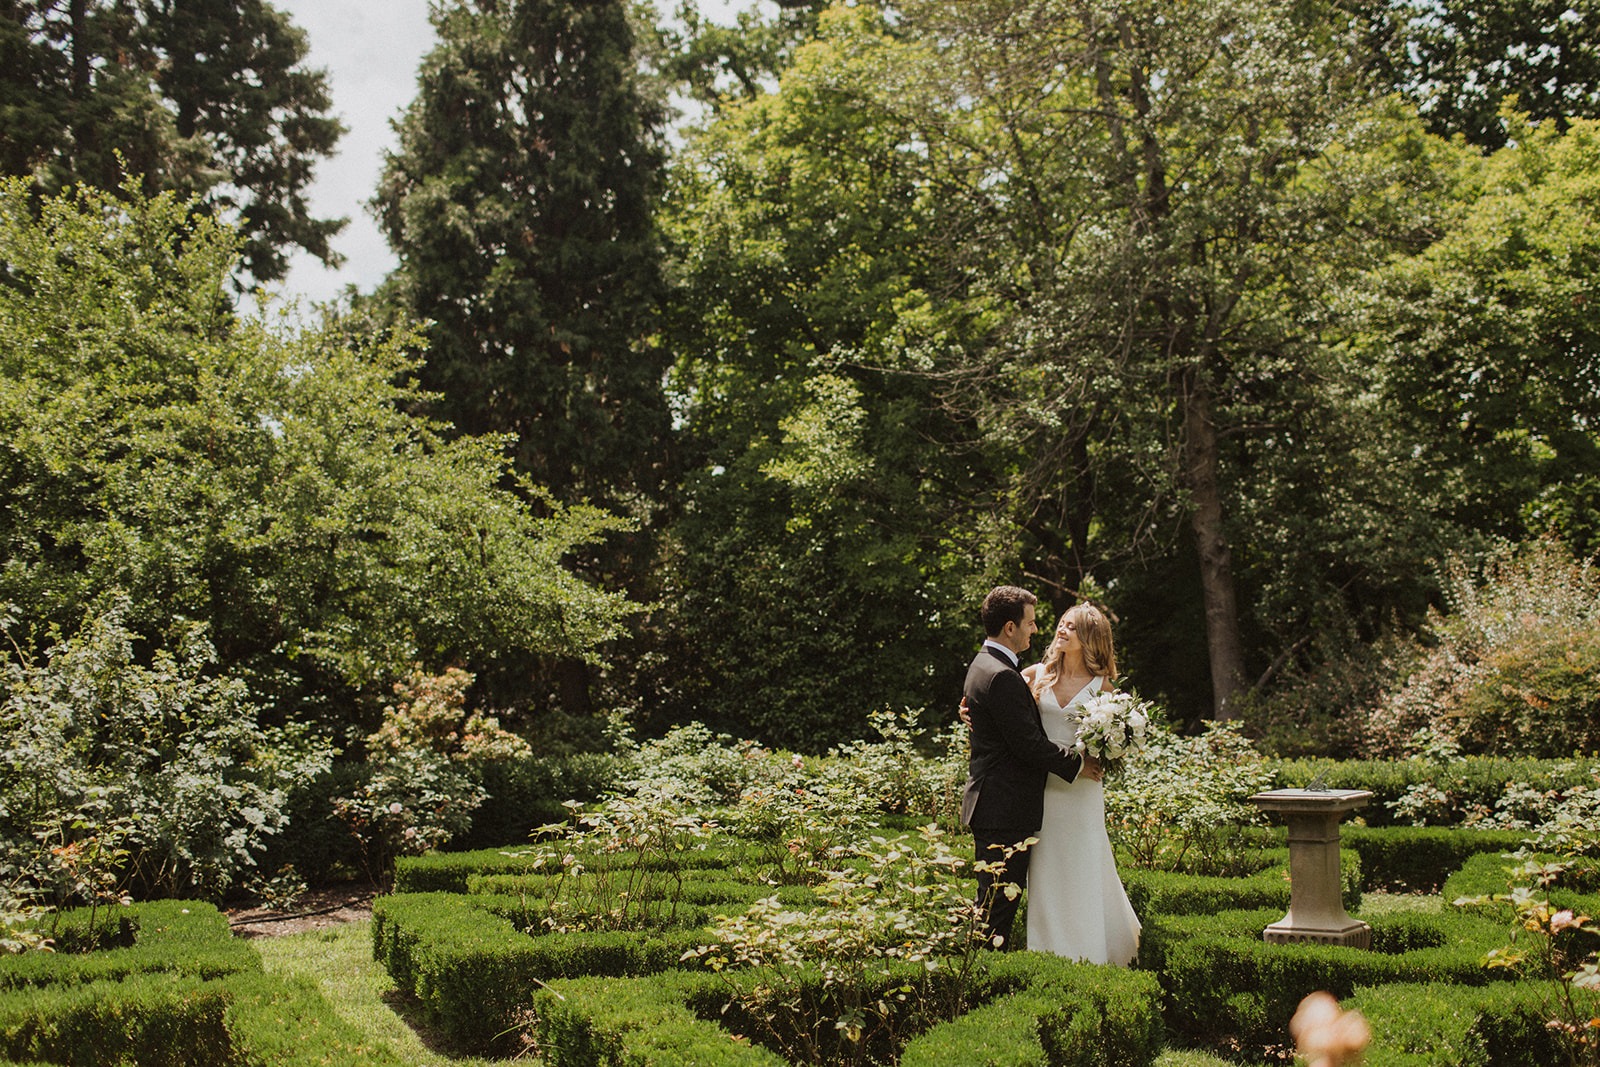 Couple embraces at European Style intimate wedding in garden